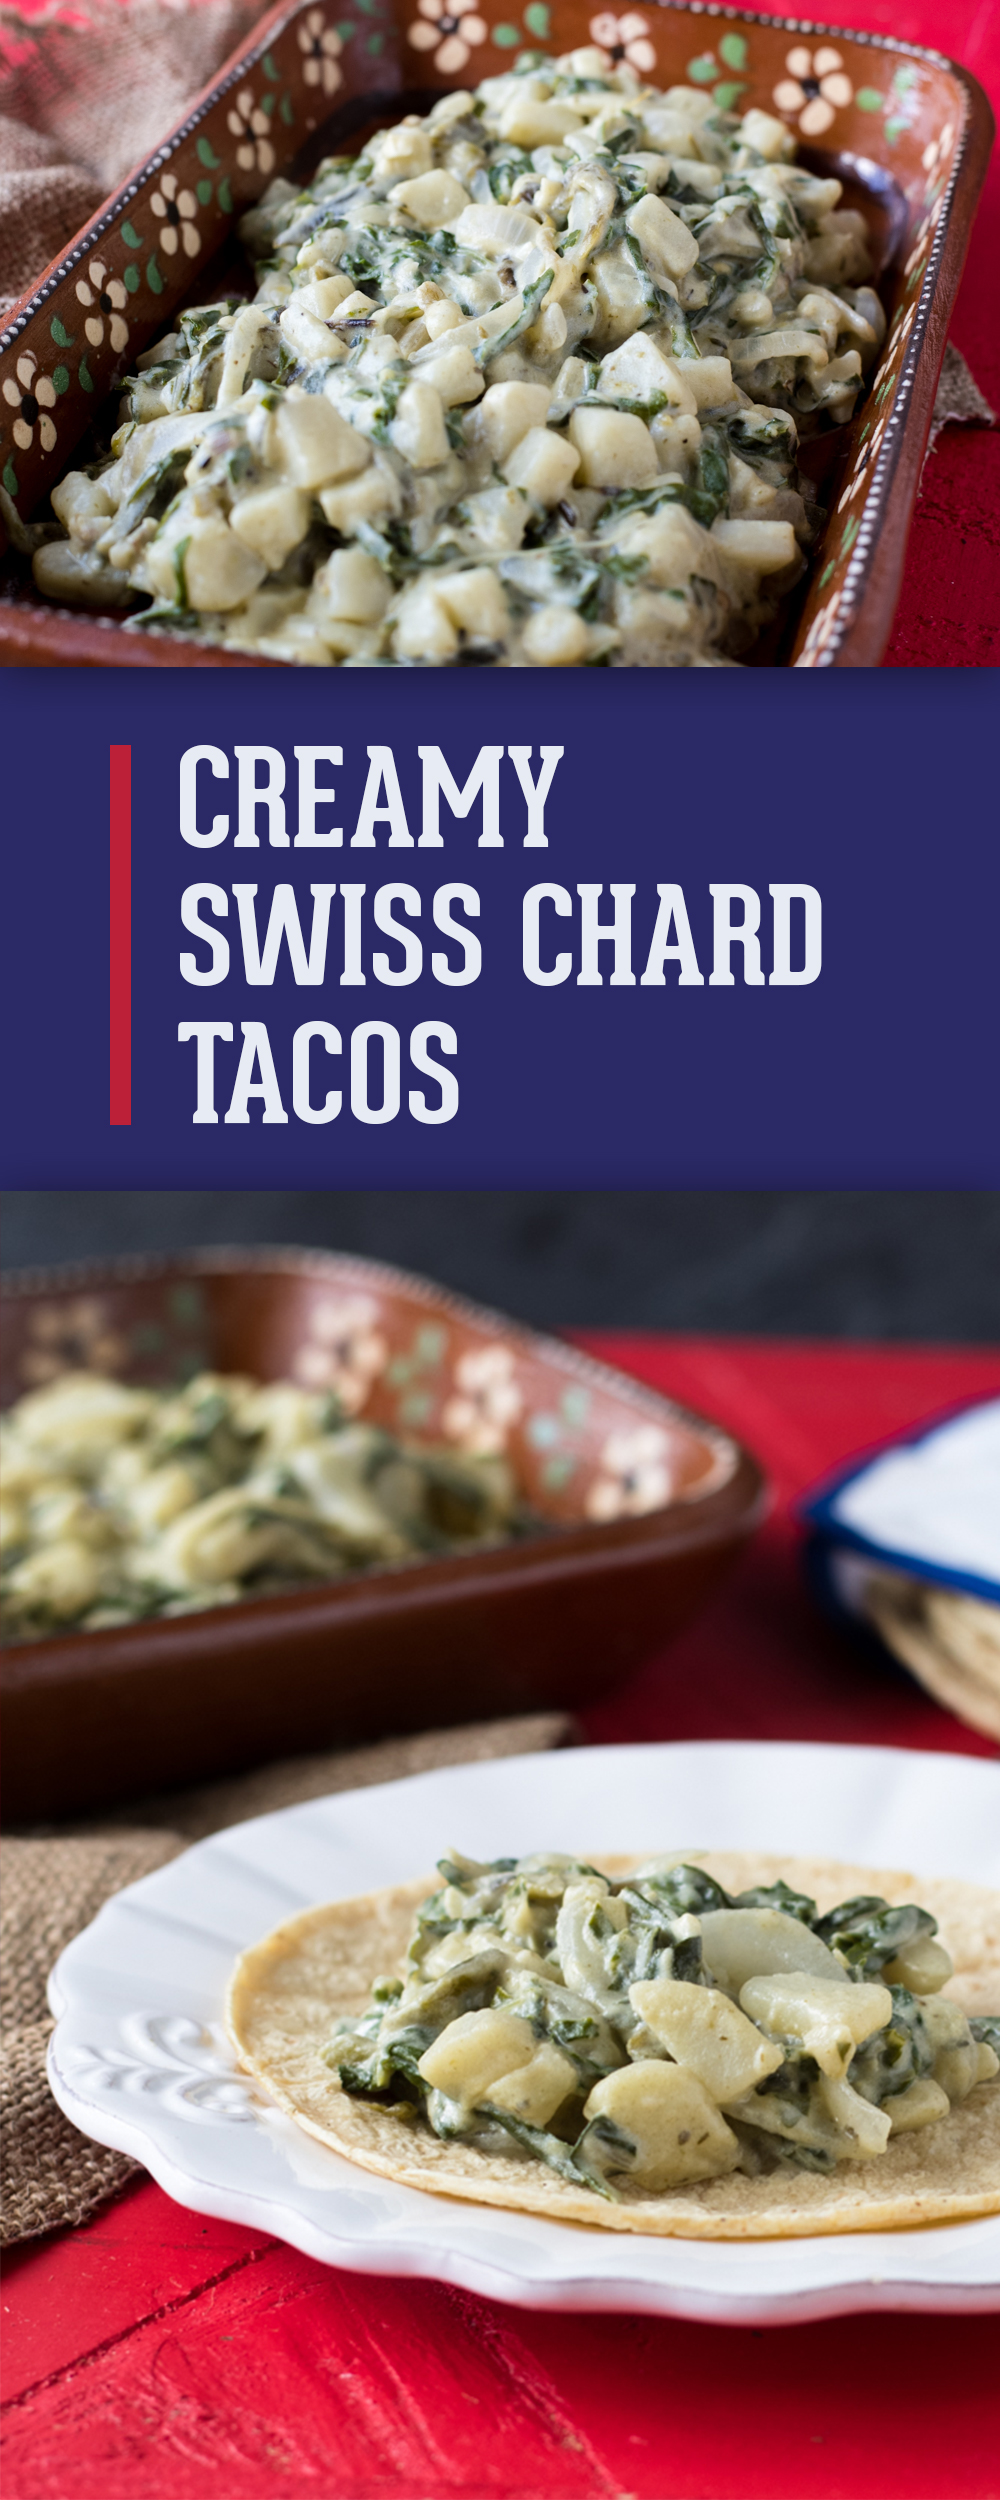 The rich combination of cream and poblano peppers is popular all throughout Mexico. If you've never had the luscious combination of green chiles and leafy greens, you are in for a real treat!